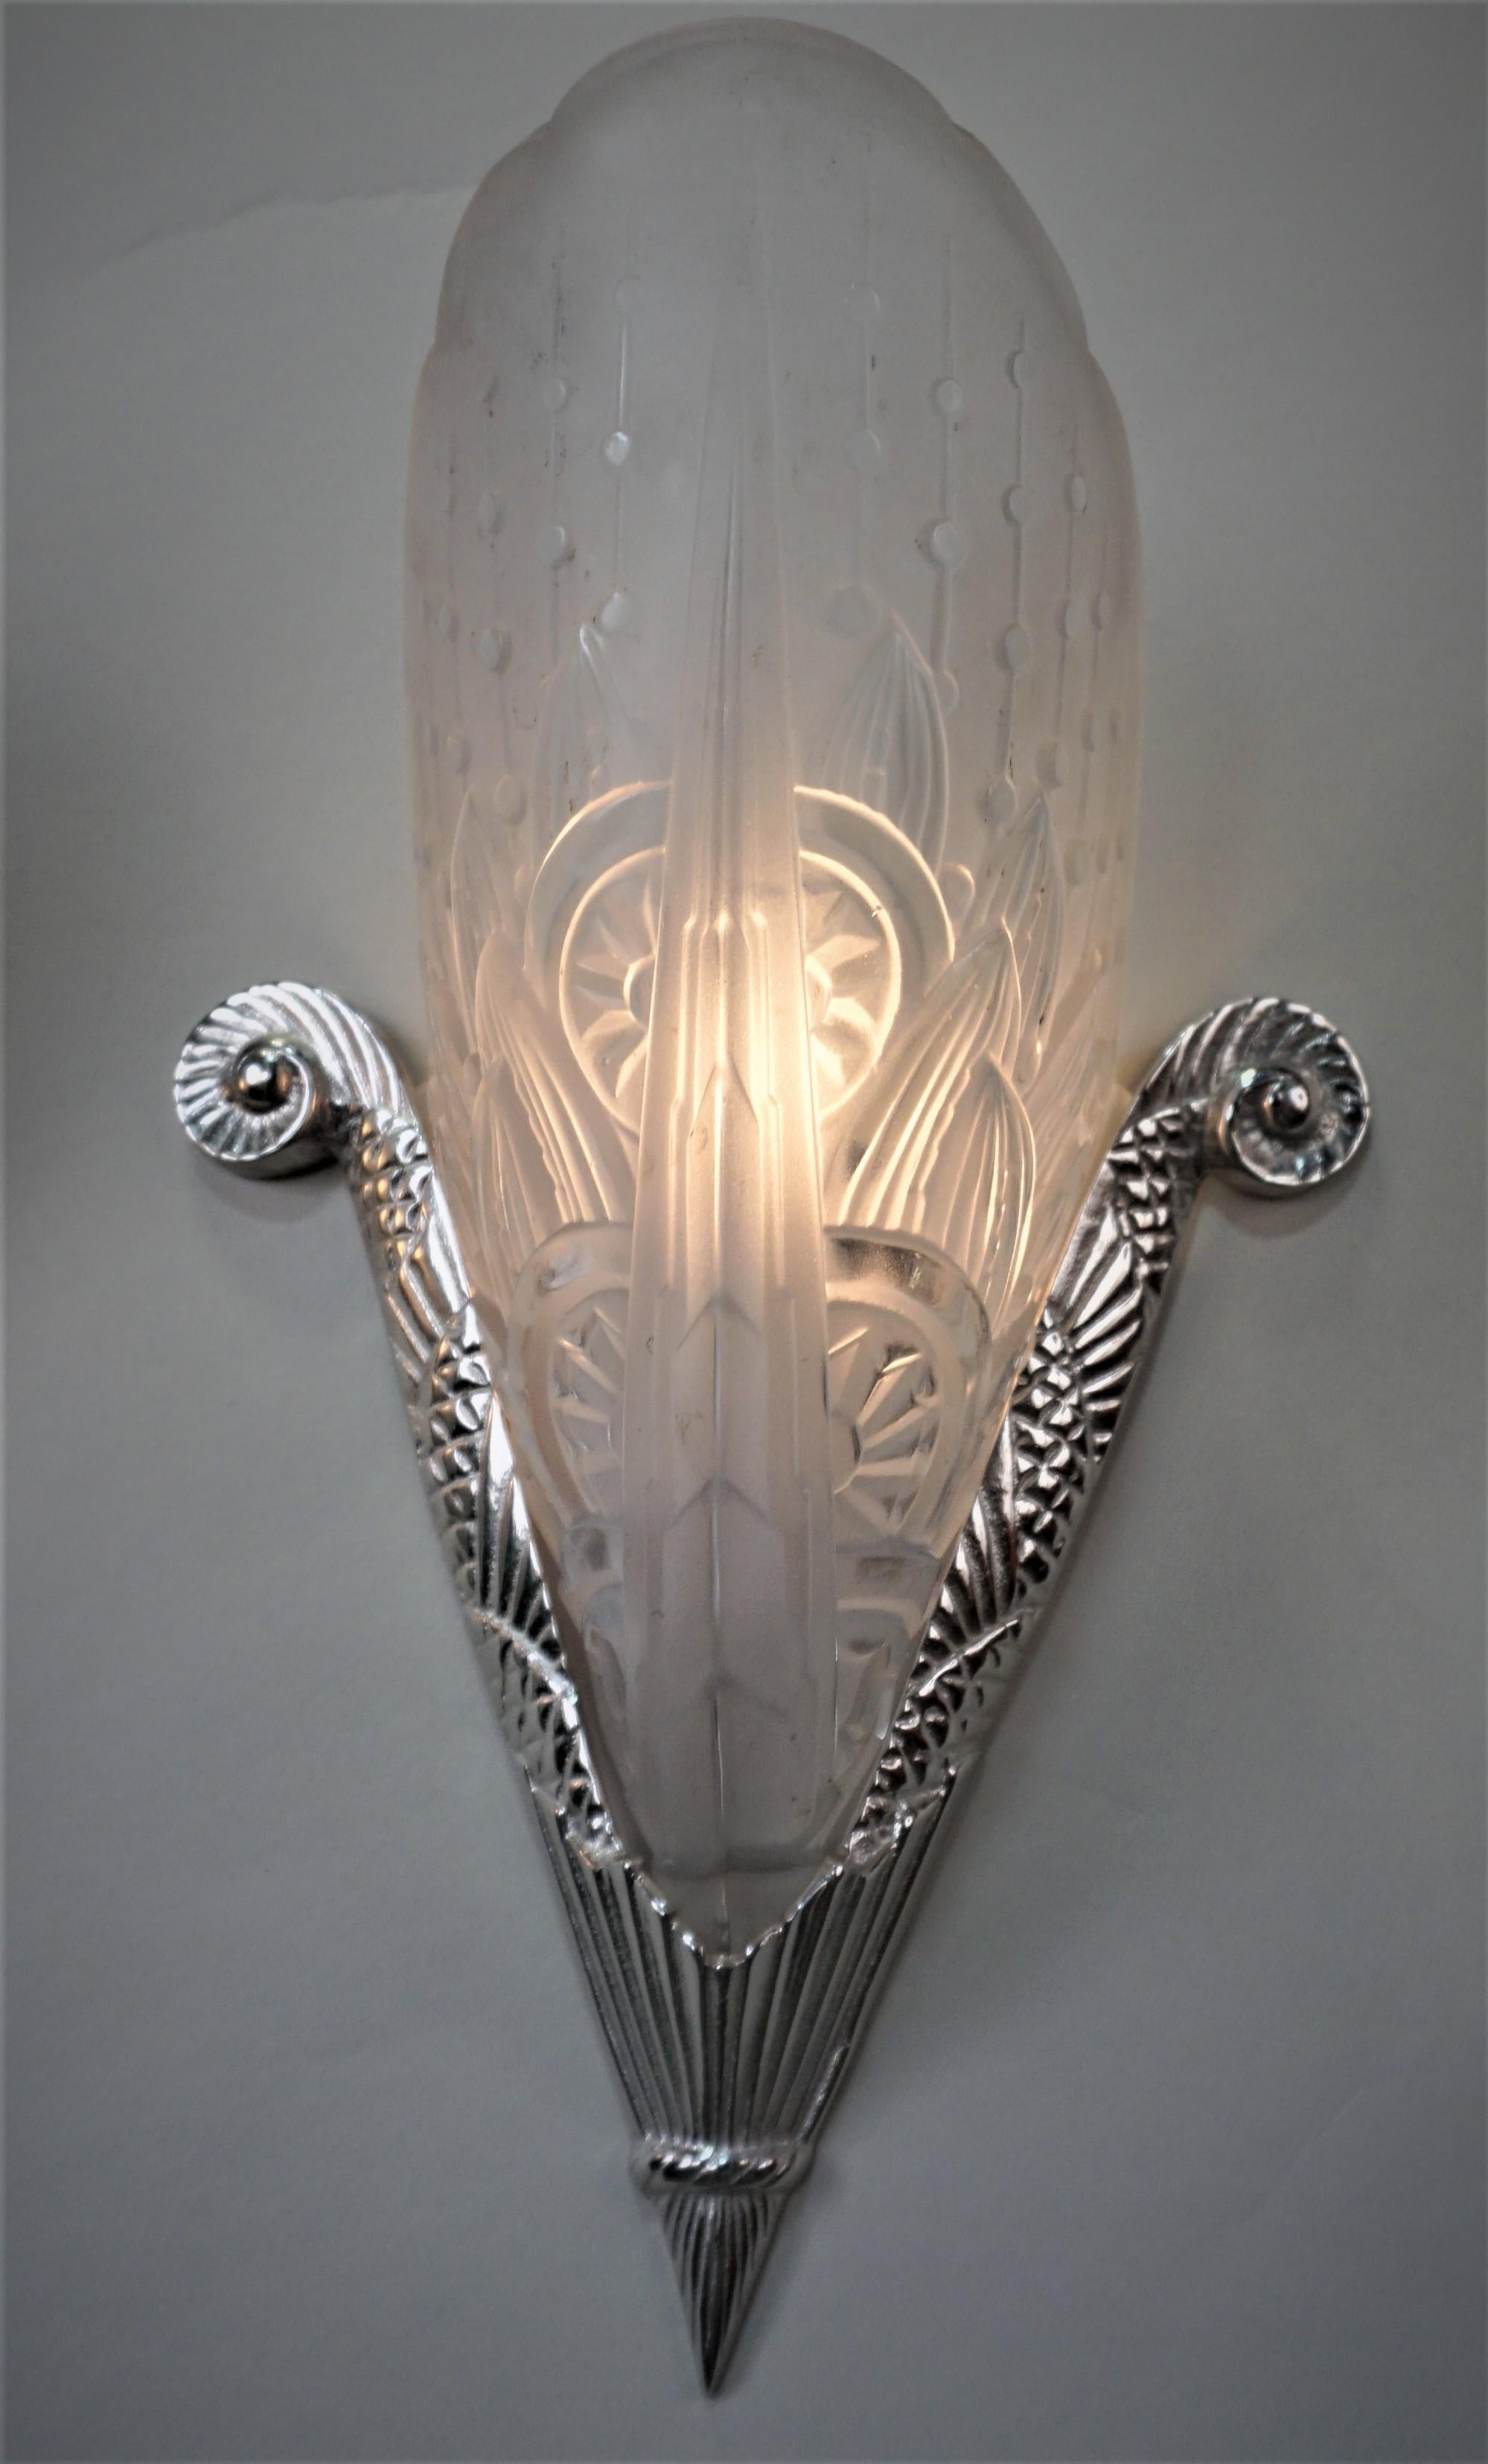 Early 20th Century Pair of French Art Deco Wall Sconces by Lorraine Nancy